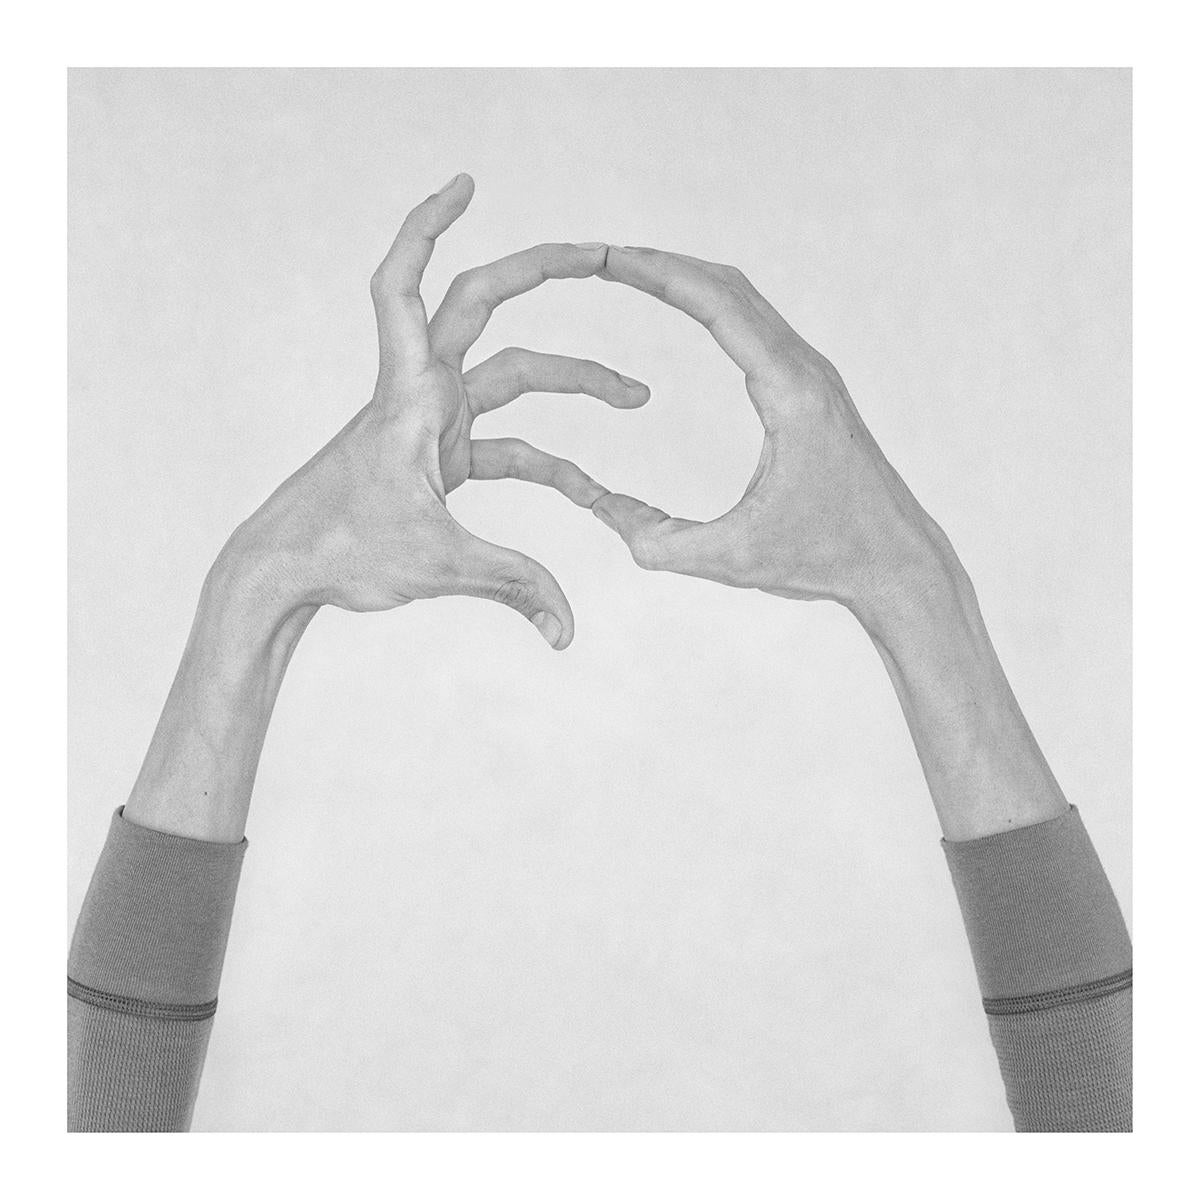 Untitled IX. From the Series Chiromorphose. Hands. Black & White Photography